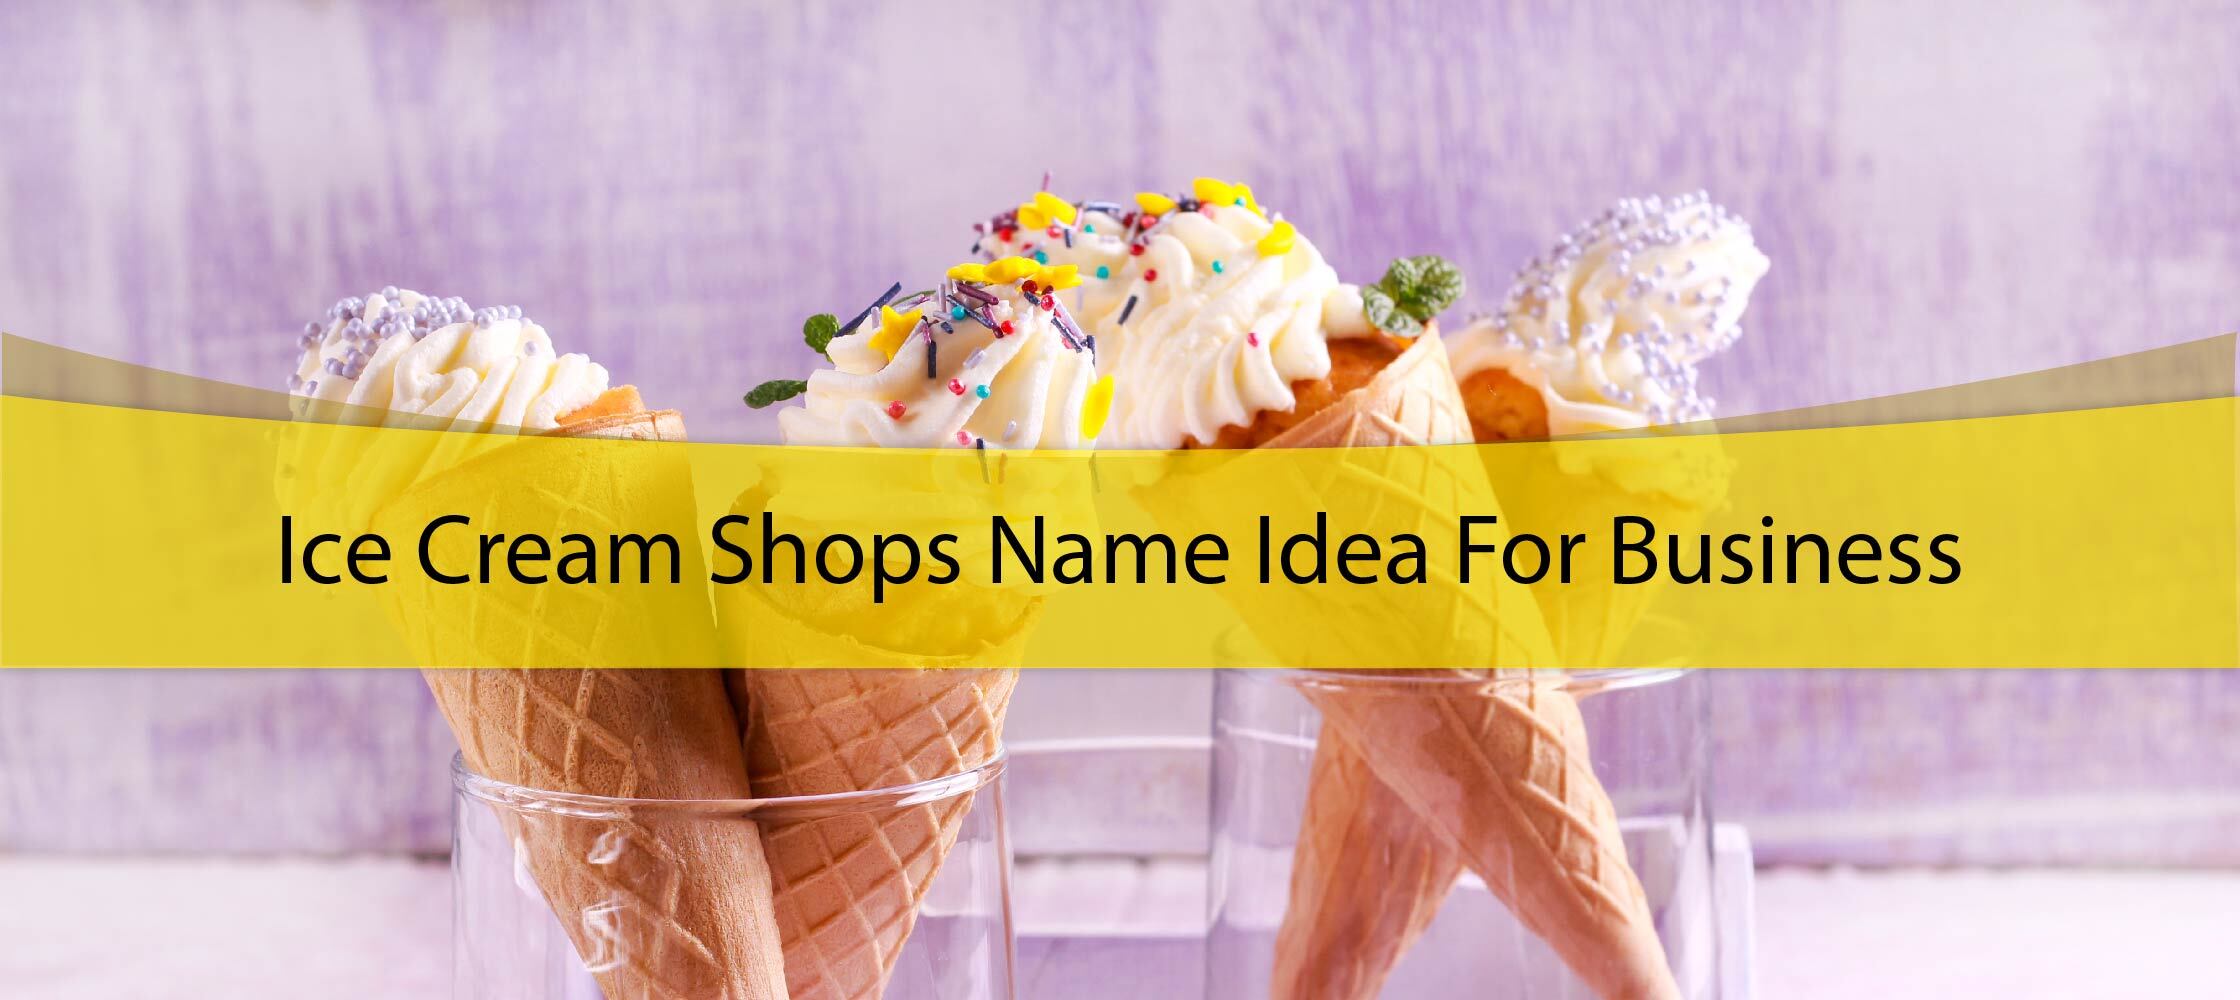 Ice - Cream Name Ideas For Business